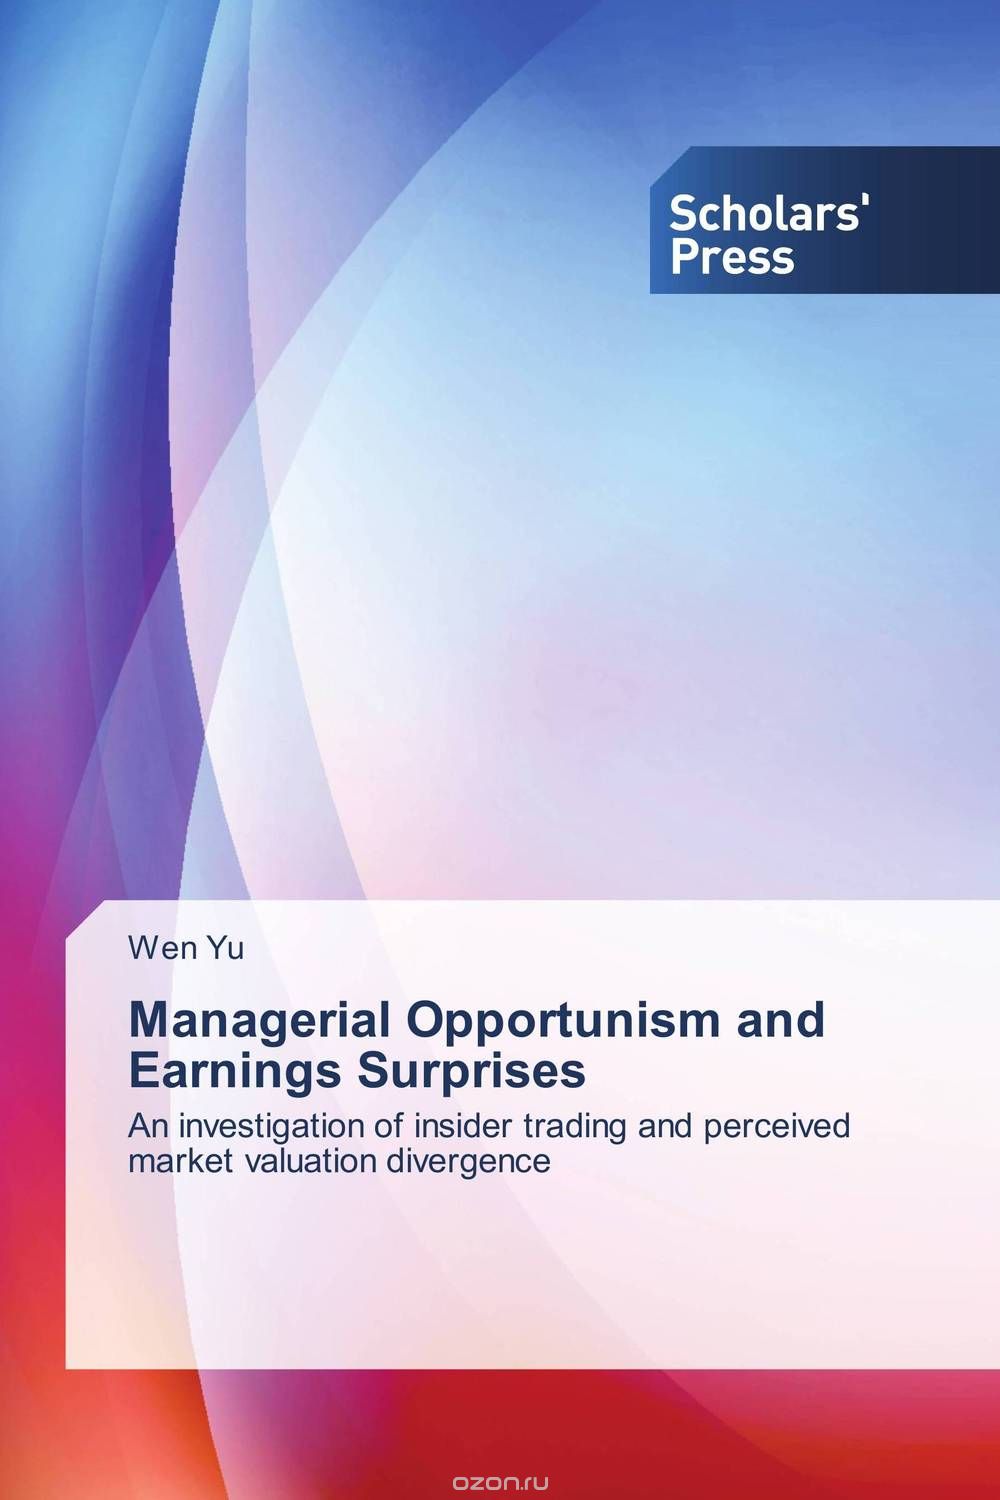 Скачать книгу "Managerial Opportunism and Earnings Surprises"